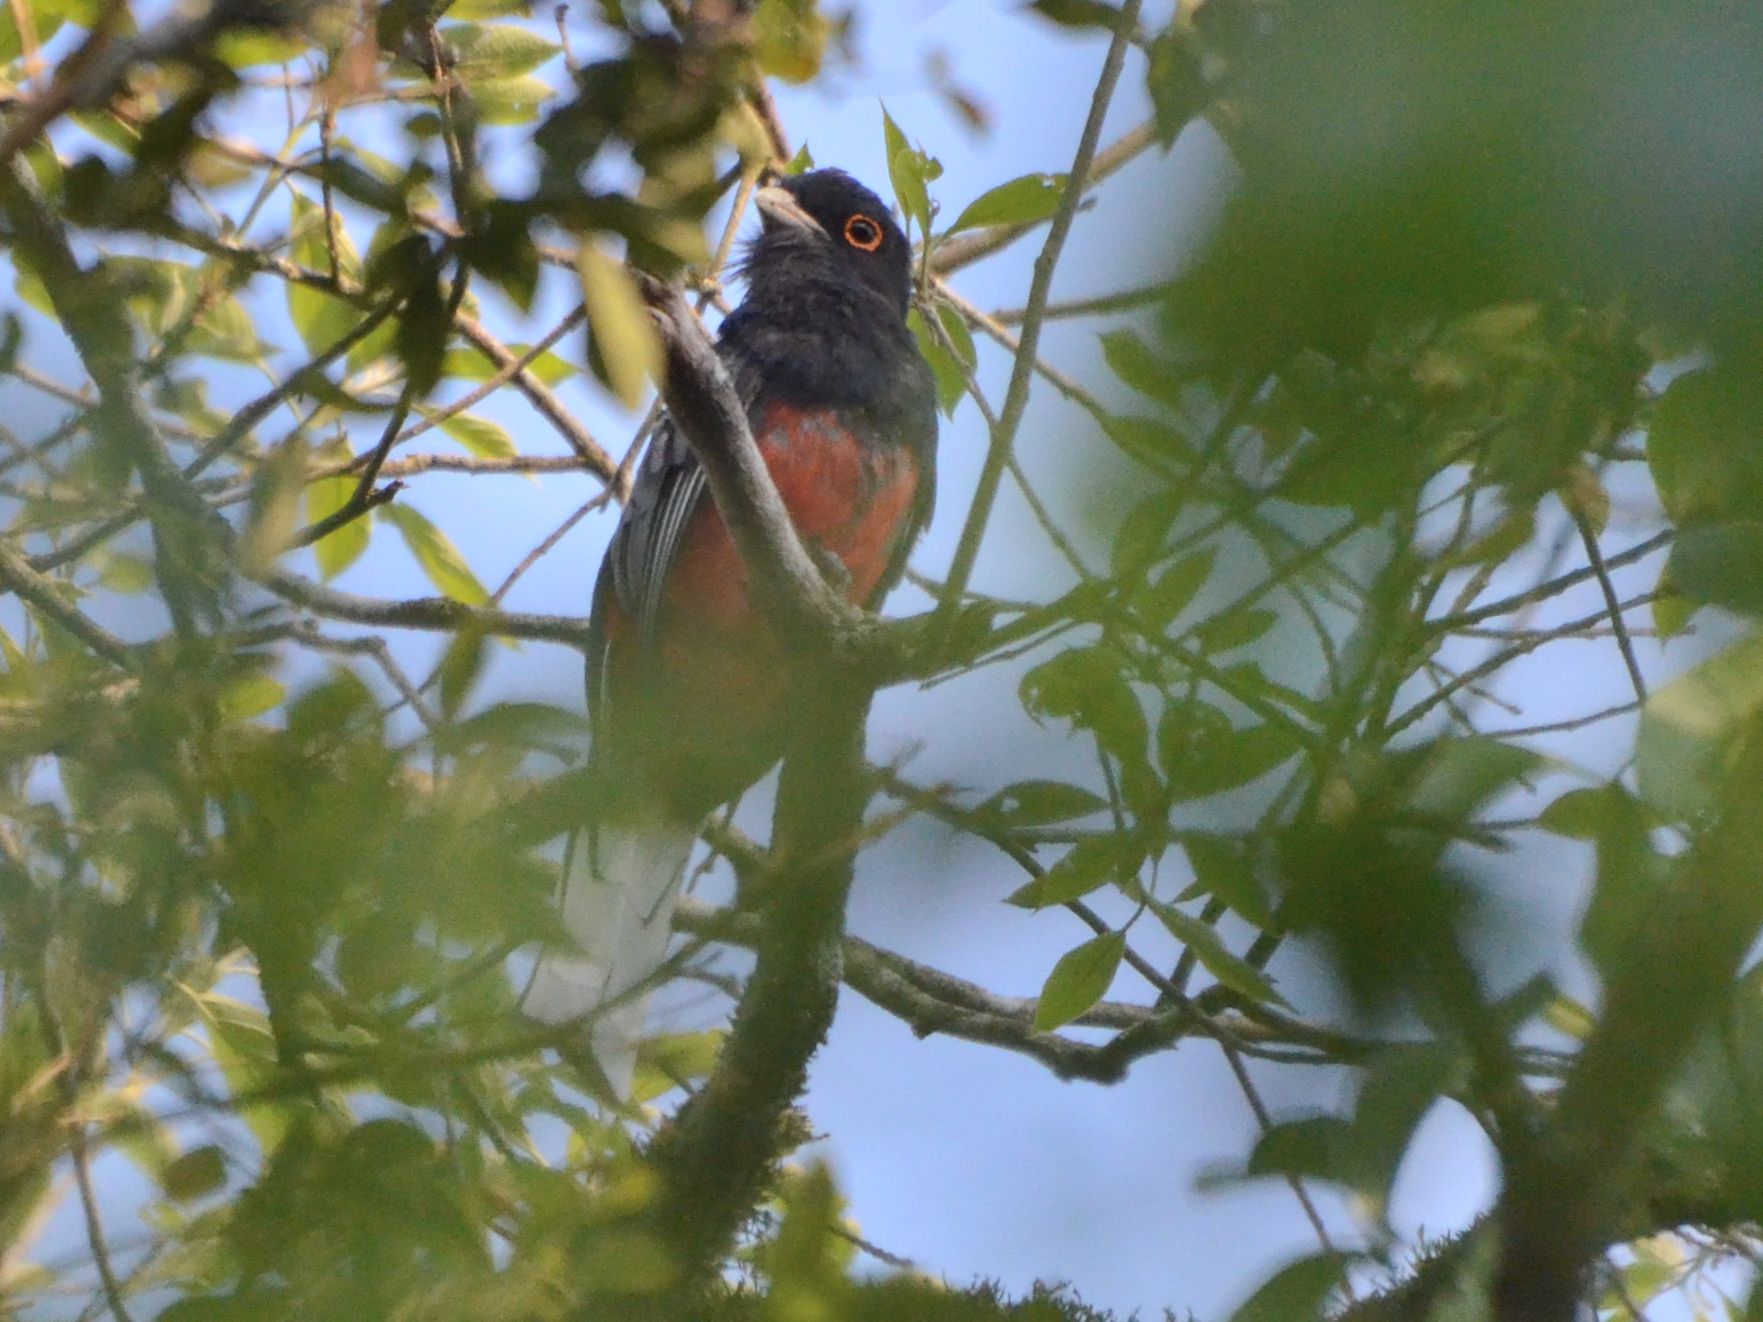 Click picture to see more Surucua Trogon - Red Bellies.